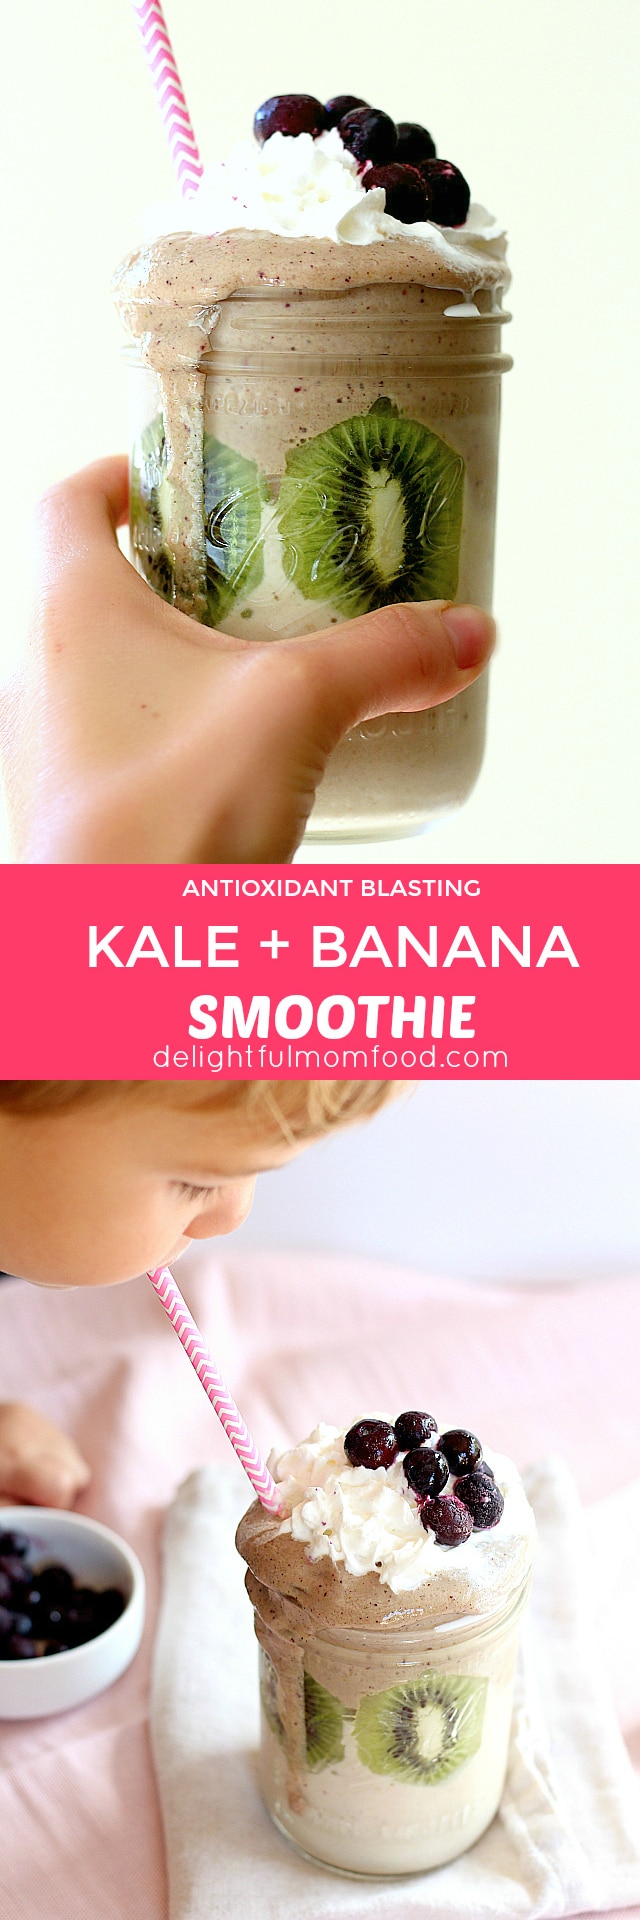 Seriously the easiest and BEST Antioxidant rich kale banana smoothie recipe! Takes 5 minutes!